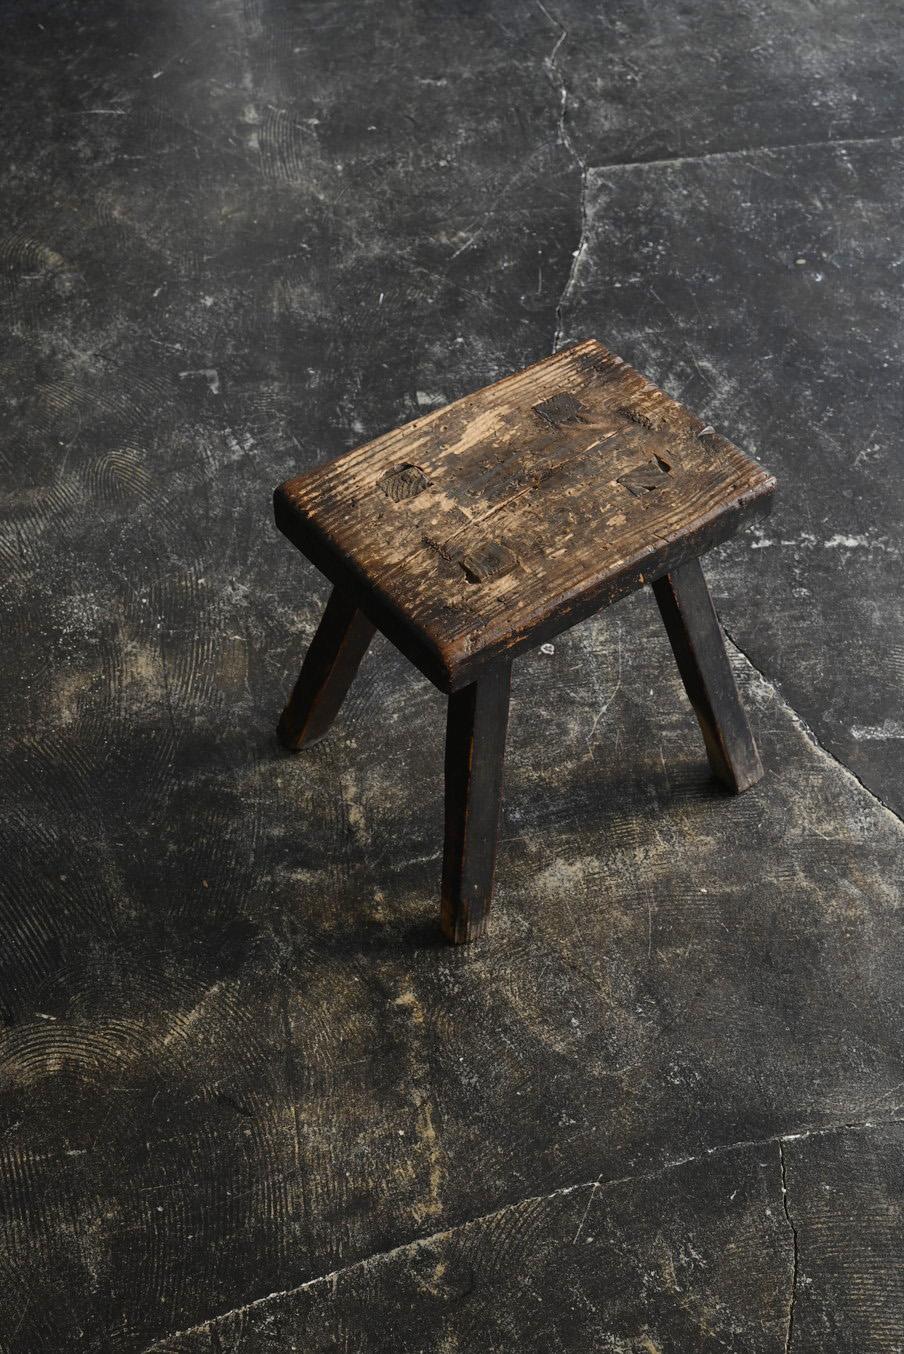 This is a wooden stool made from the Meiji period to the early Showa period in Japan.
It is thought to be a work stool used by craftsmen.
The material is believed to be cedar or pine.
Although it is a simple structure, the wood has a nice taste,